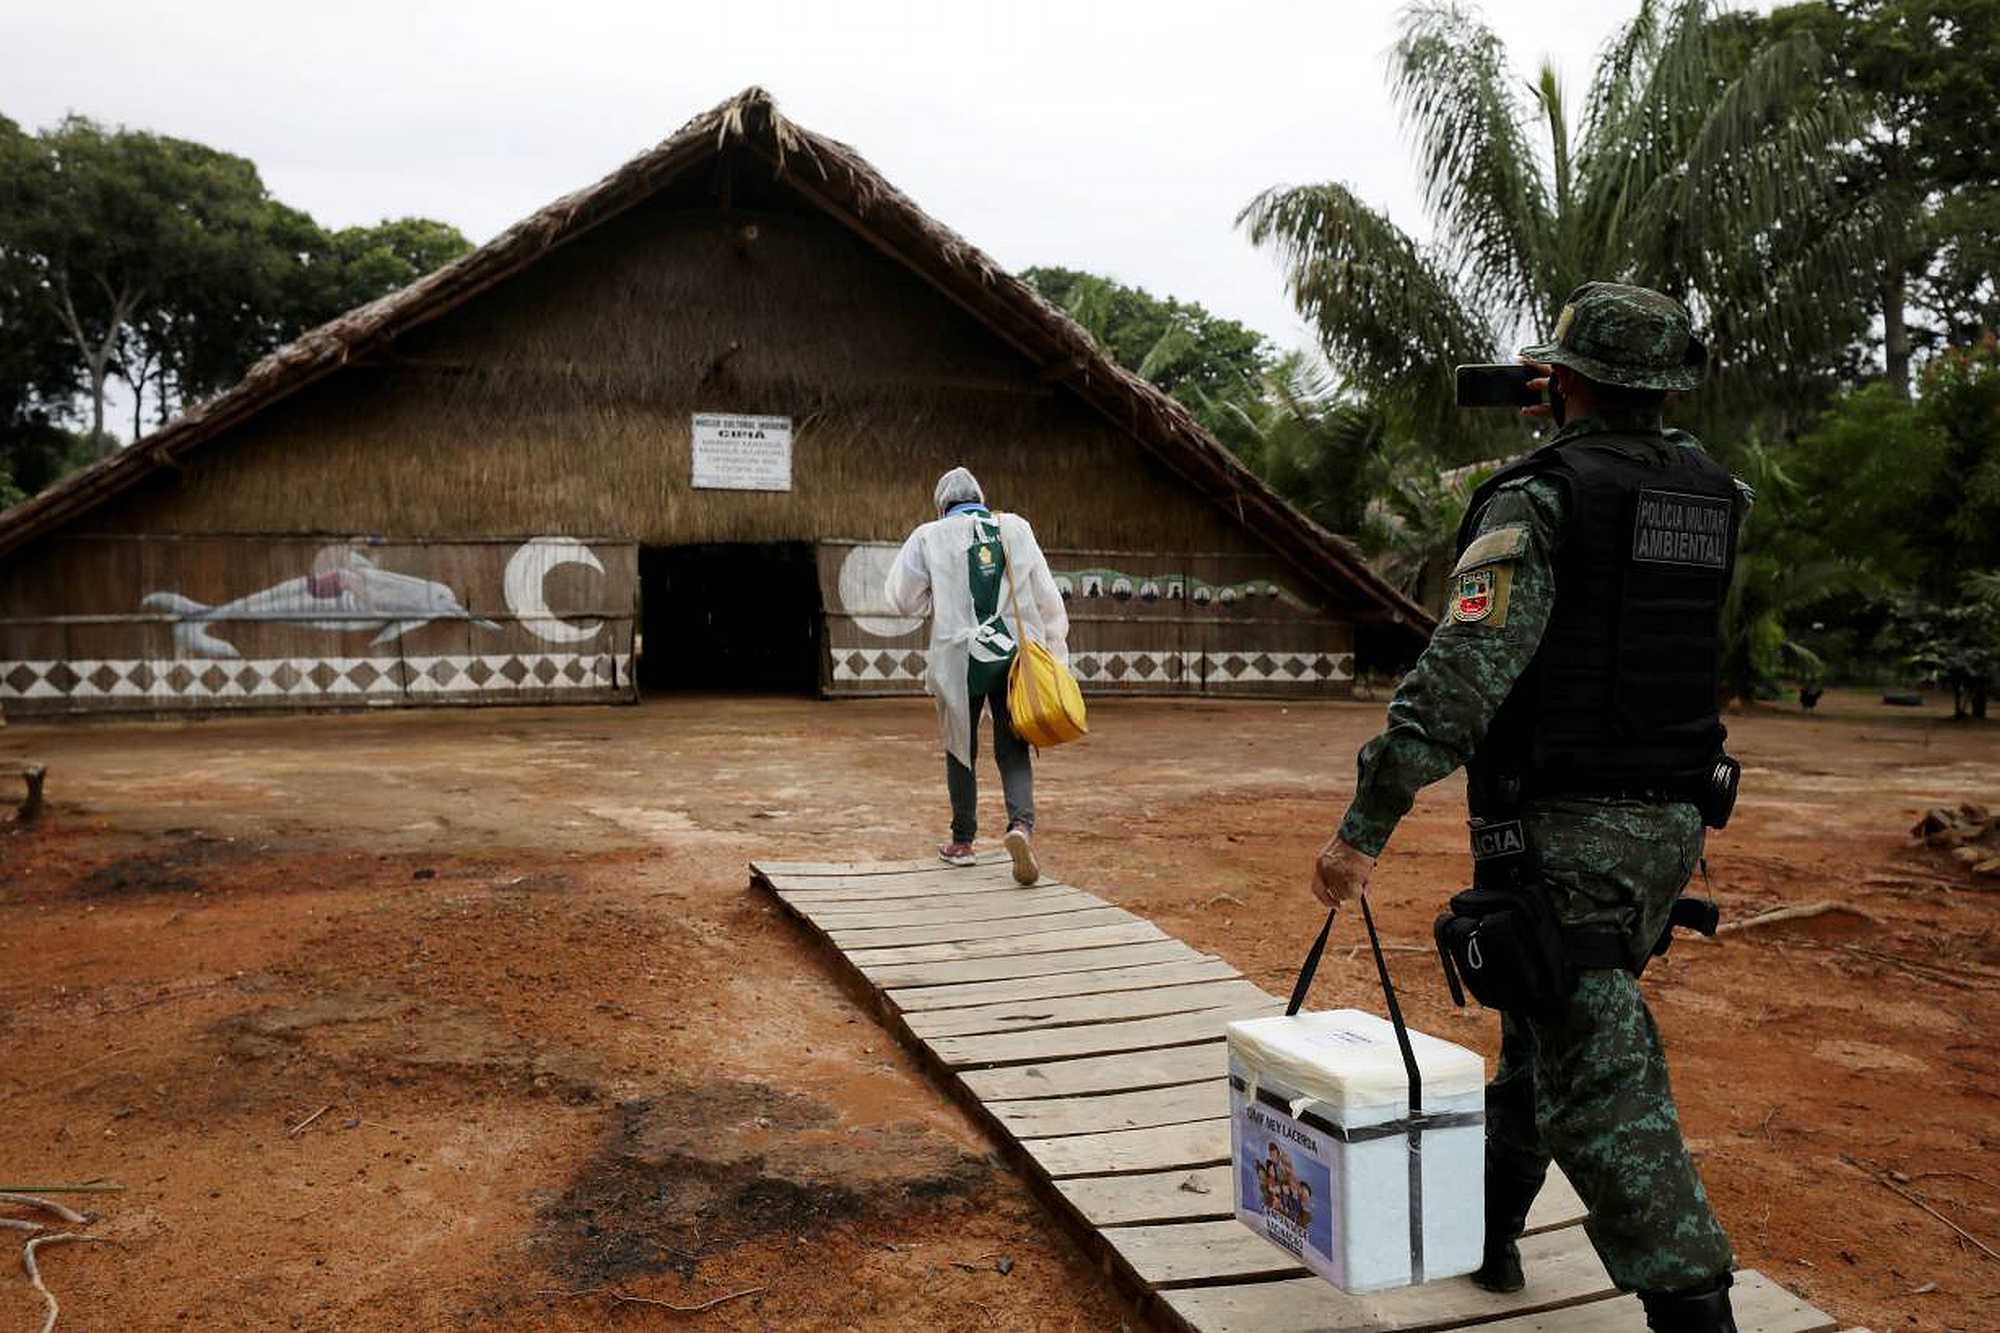 A municipal health worker and an environmental military police officer carry the AstraZeneca/Oxford vaccine to an Indigenous hut in Manaus, Brazil. - REUTERS/Bruno Kelly